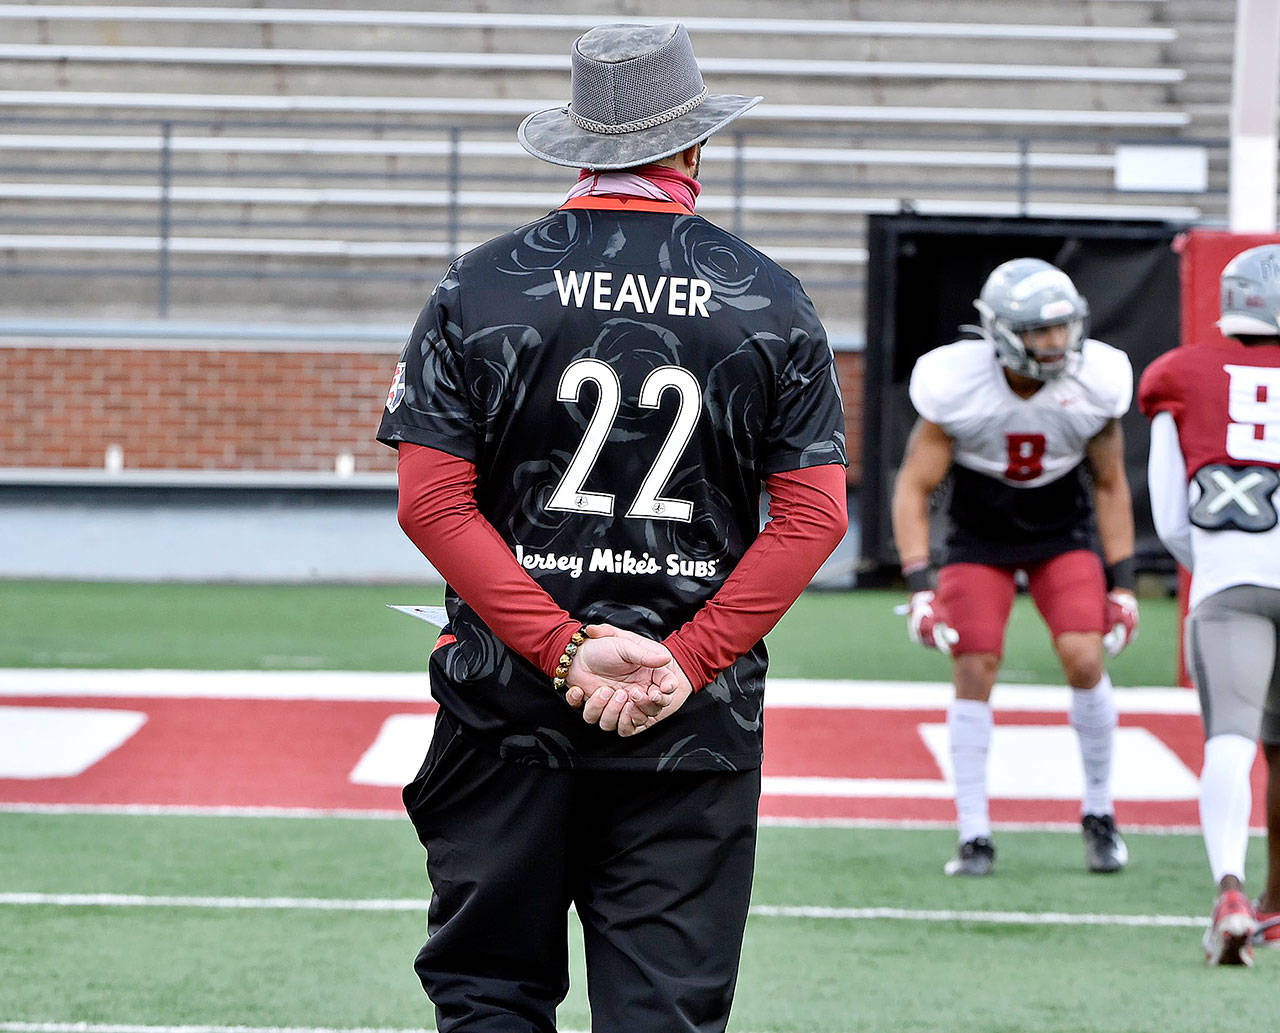 Washington State football coach Nick Rolovich wearing the jersey of Portland Thorns forward and former Cougars’ women’s soccer standout Morgan Weaver during a scrimmage Saturday. (Photo courtesy of Washington State University Athletics)